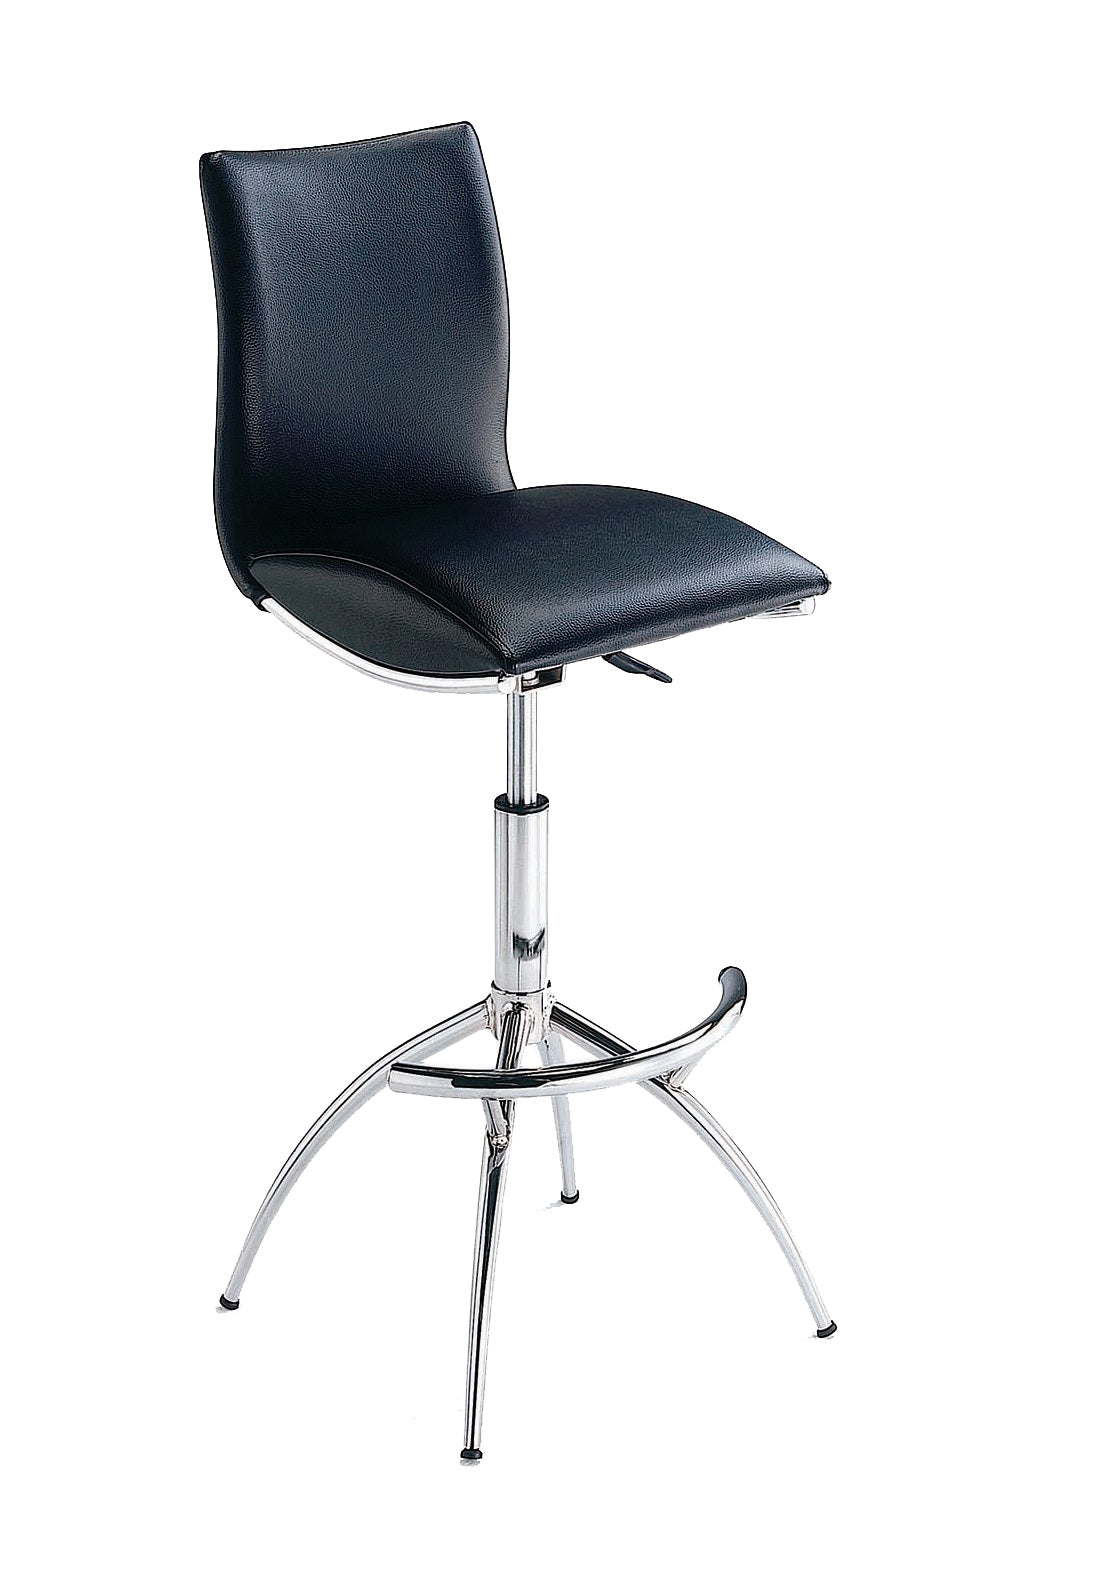 Modern Barstool Leatherette/Chrome Adjustable Height In Black Color - Enova Luxe Home Store